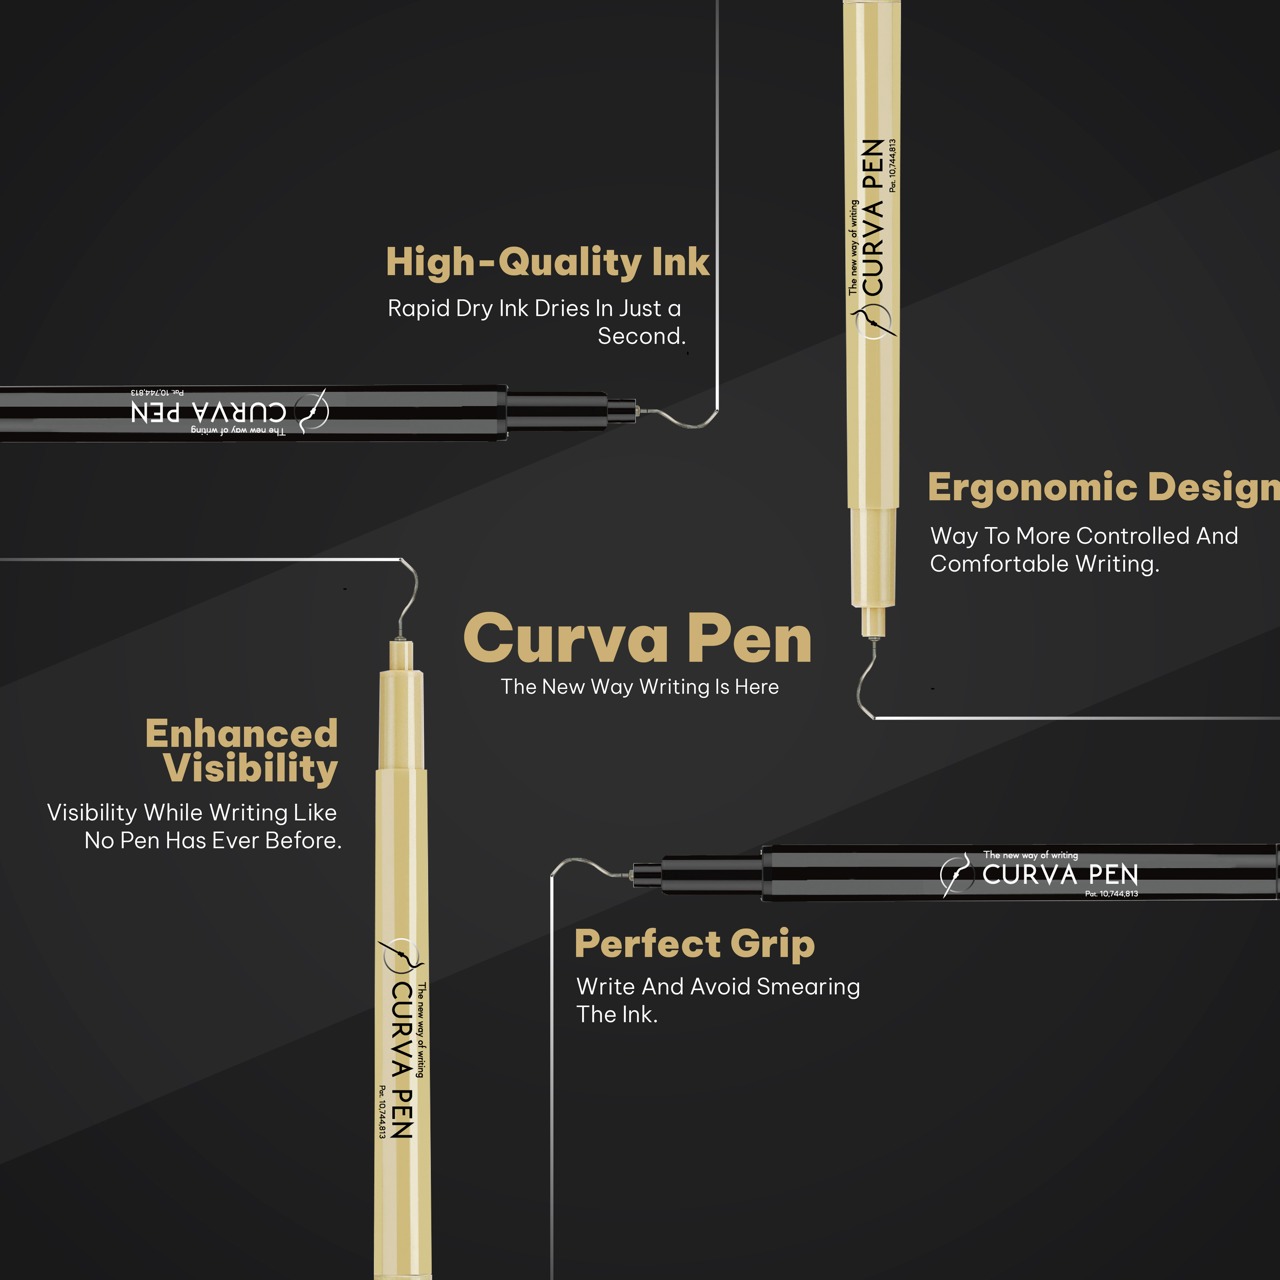 Curva Pen is designed to get you hooked into loving writing again